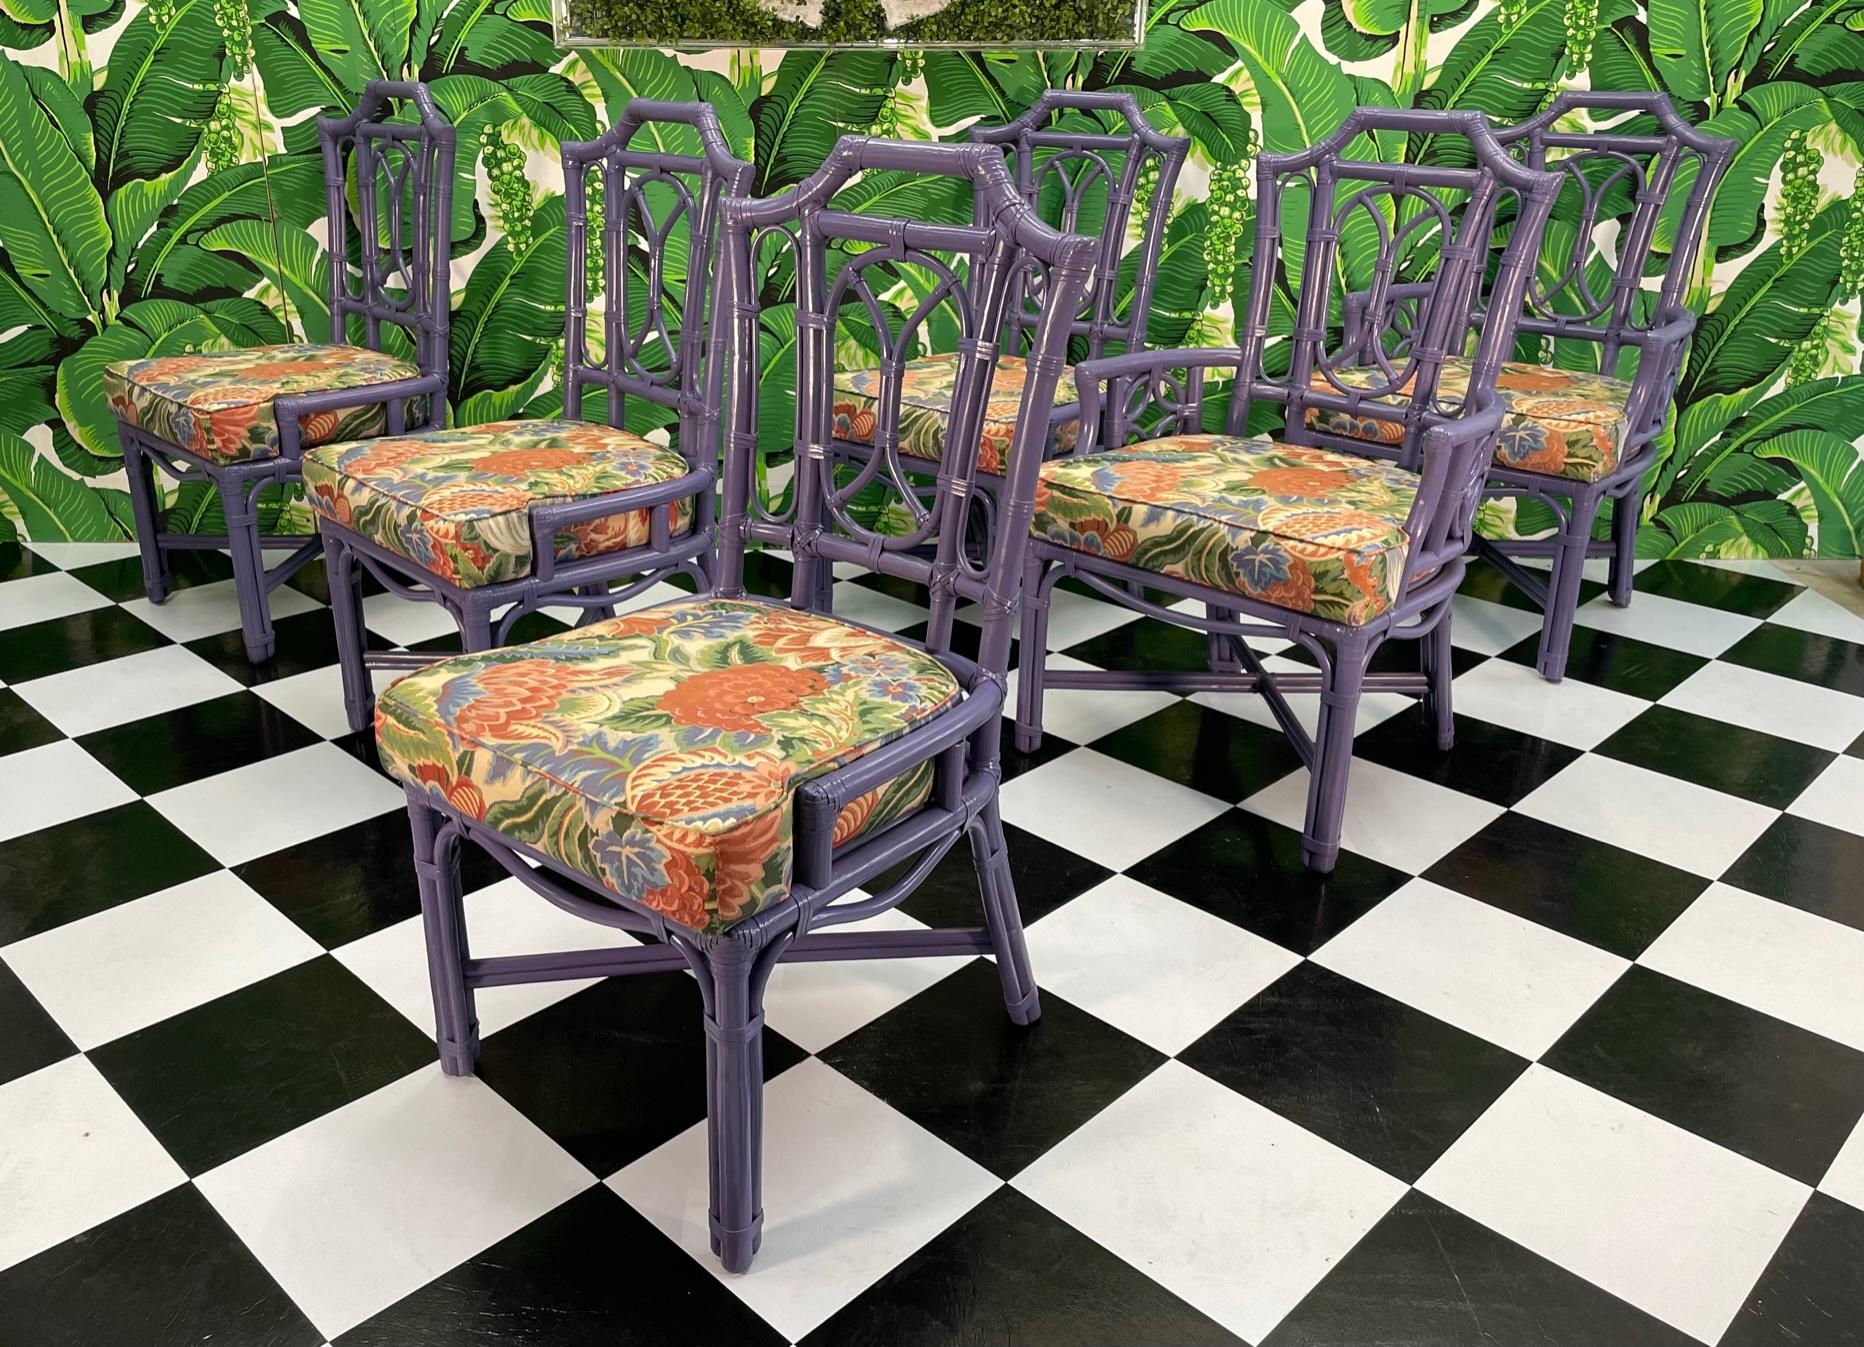 Set of 6 rattan pagoda style dining chairs by Ficks Reed feature a high gloss finish and floral upholstery. Structurally sound, all strapping in tact, upholstery in good condition save for one cushion that has a tear (see last photo).
Side chairs